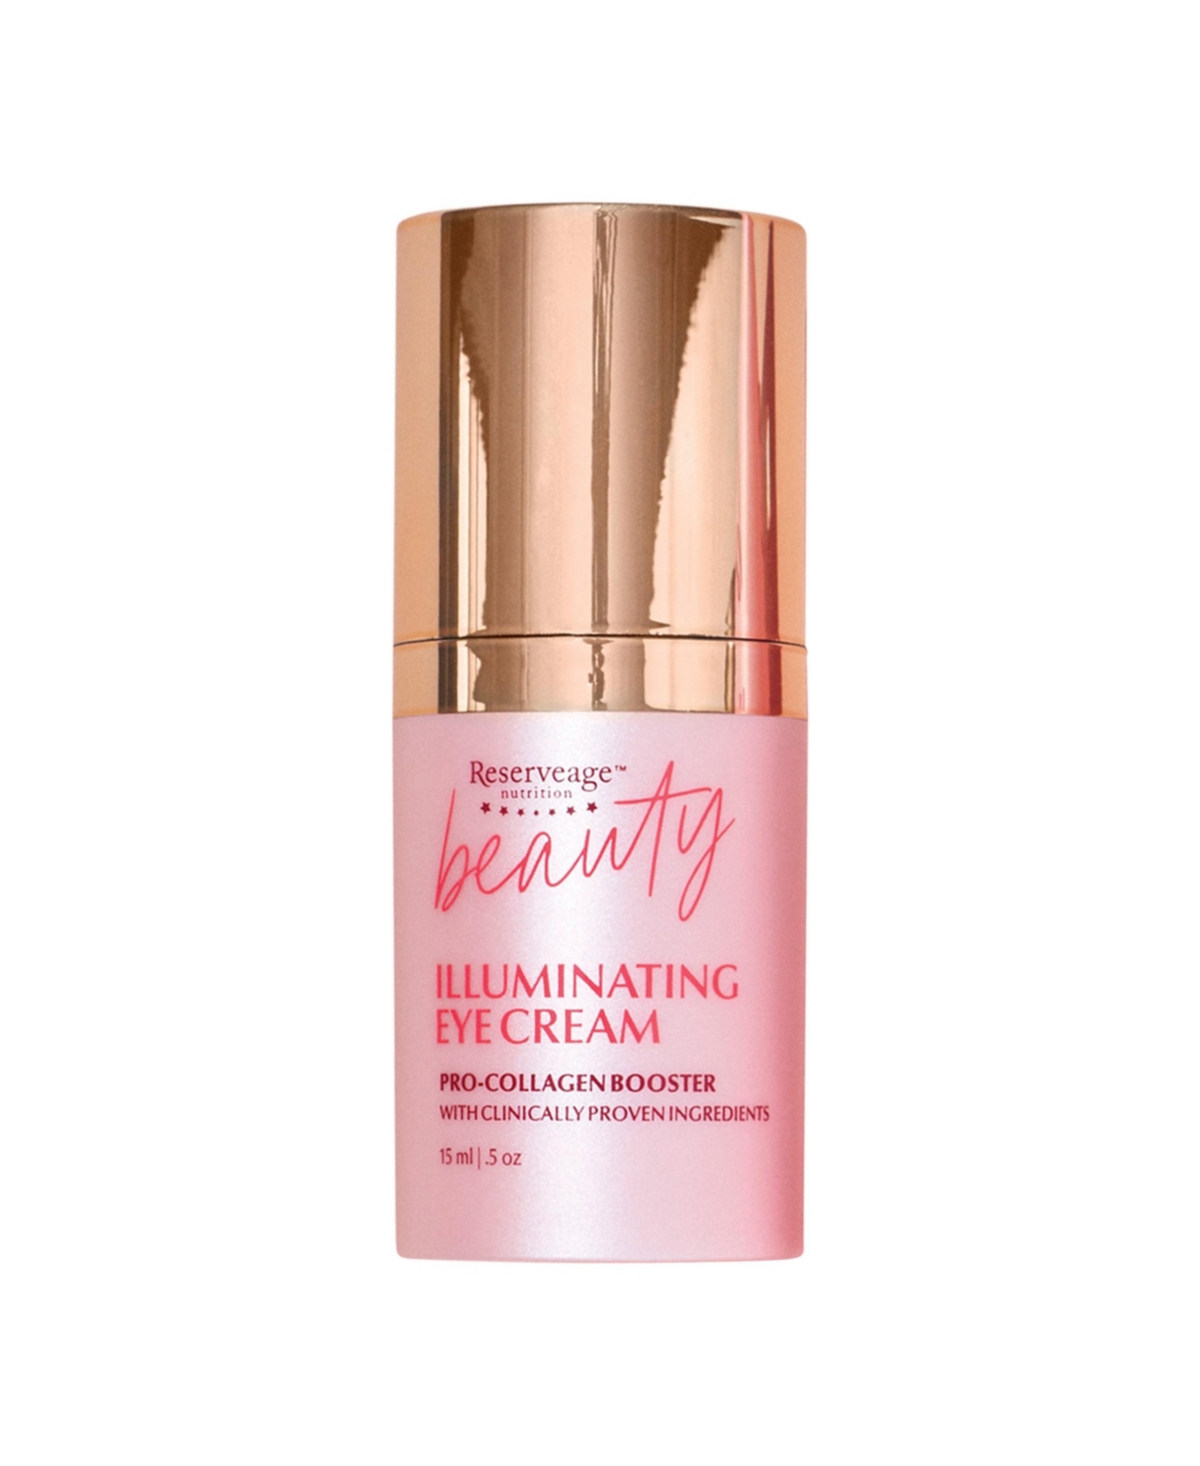 Beauty, Illuminating Eye Cream with Pro-Collagen Booster, Diminishes Dark Circle and Smooths Wrinkles with Micro-Encapsulated Copper Peptid